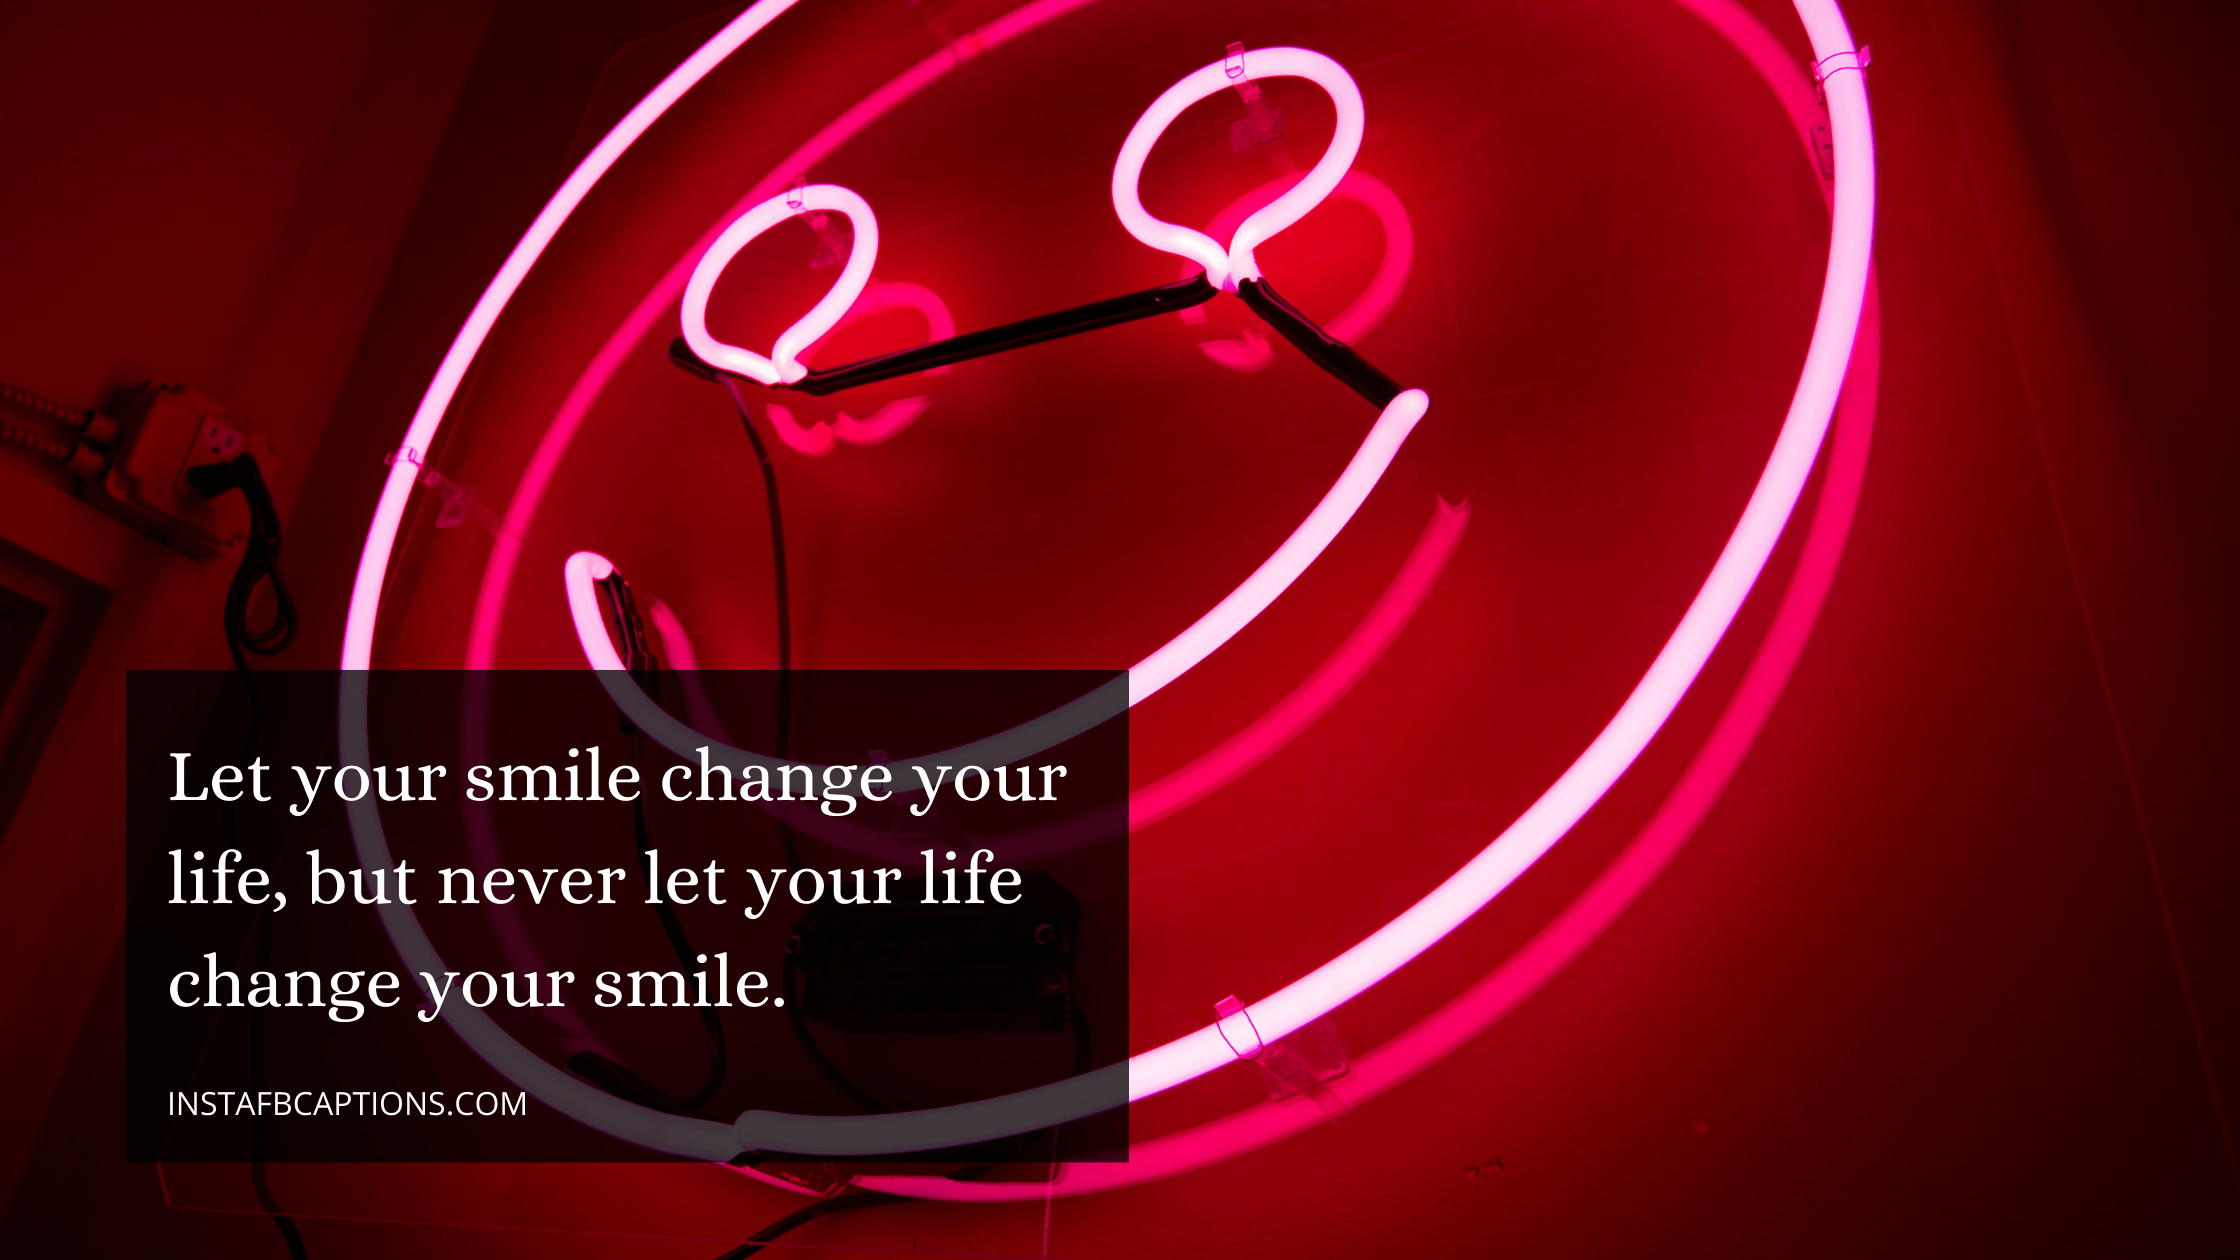 Let your smile change your life, but never let your life change your smile  - Sassy Attitude captions for Instagram - [New] Attitude Captions for Boys Girls Instagram Posts in 2023